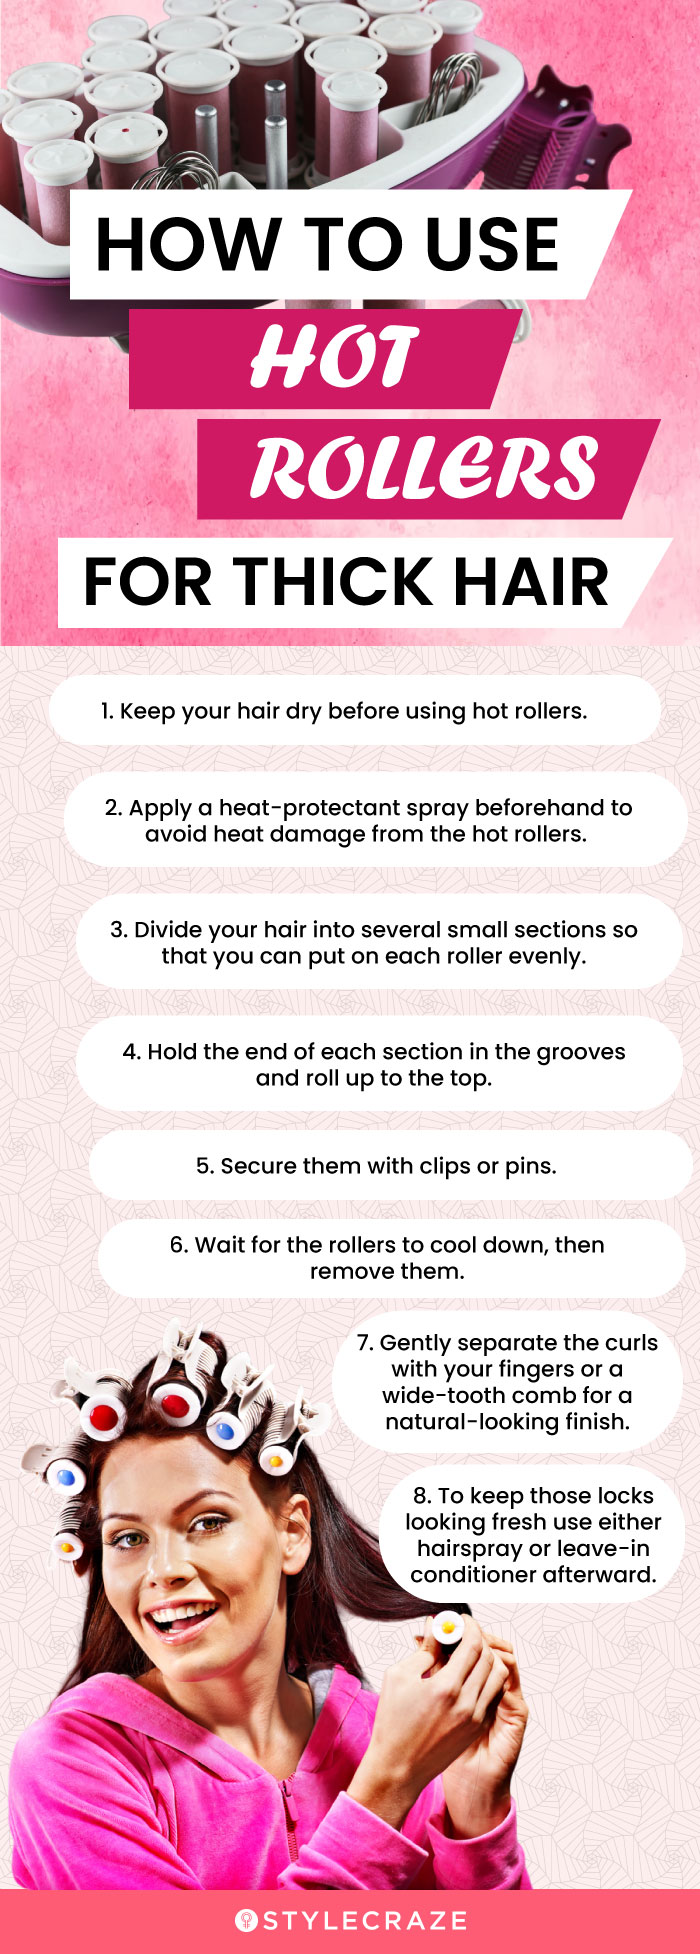 How To Use Hot Rollers For Thick Hair (infographic)